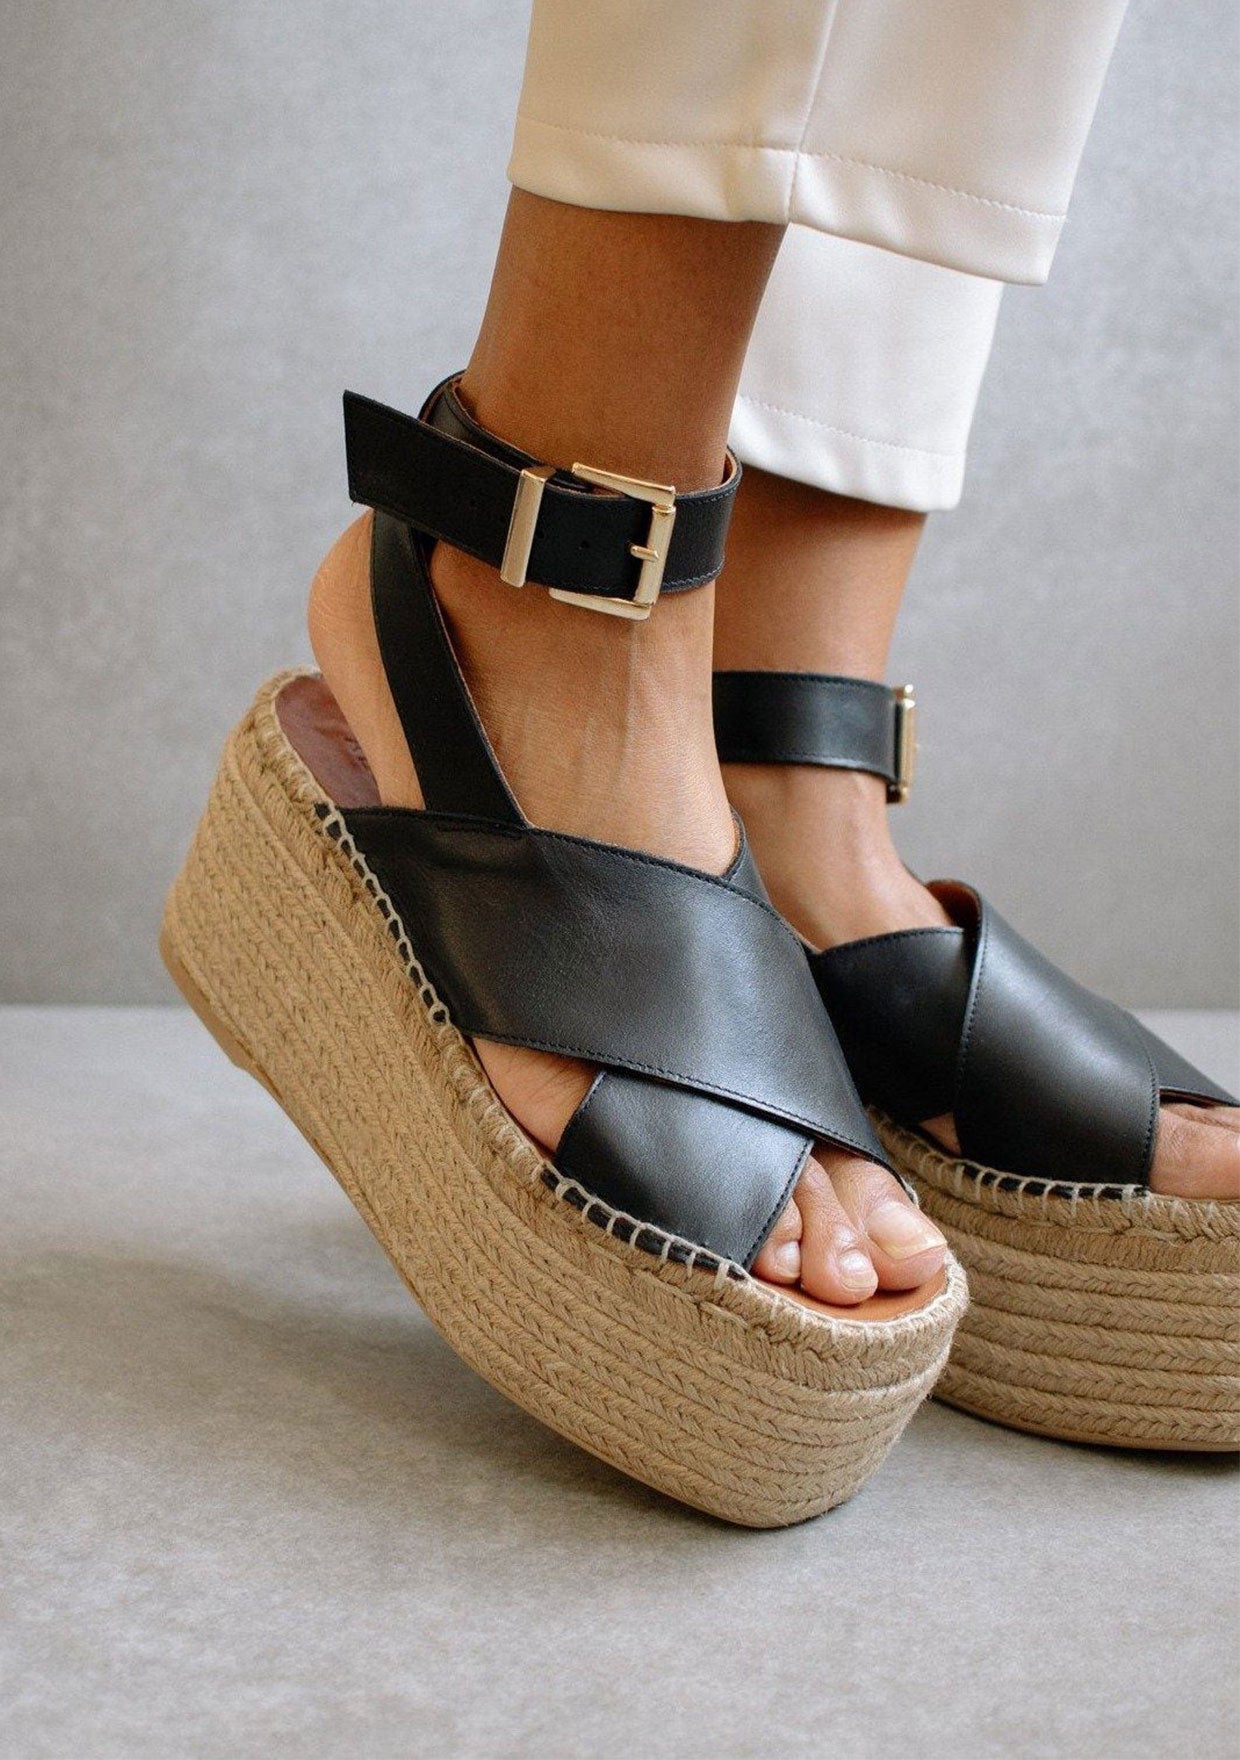 [Color: Black] Alohas elegant willow espadrille sandals with black criss crossed leather straps and a jute platform.